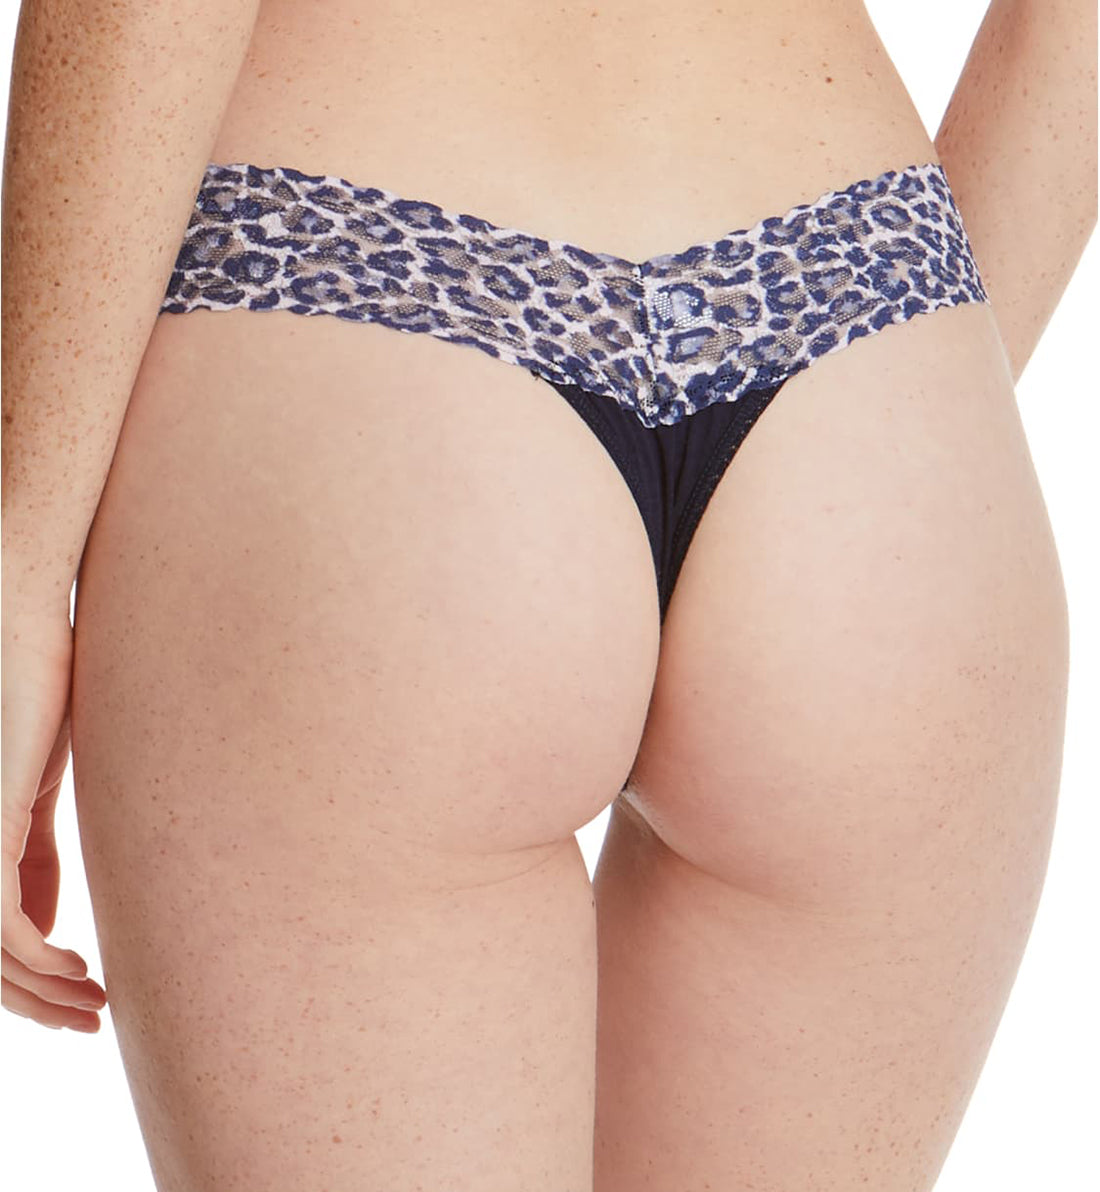 Hanky Panky Cotton-Spandex Low Rise Thong (891582P),Navy/Leopard - Navy/Leopard,One Size